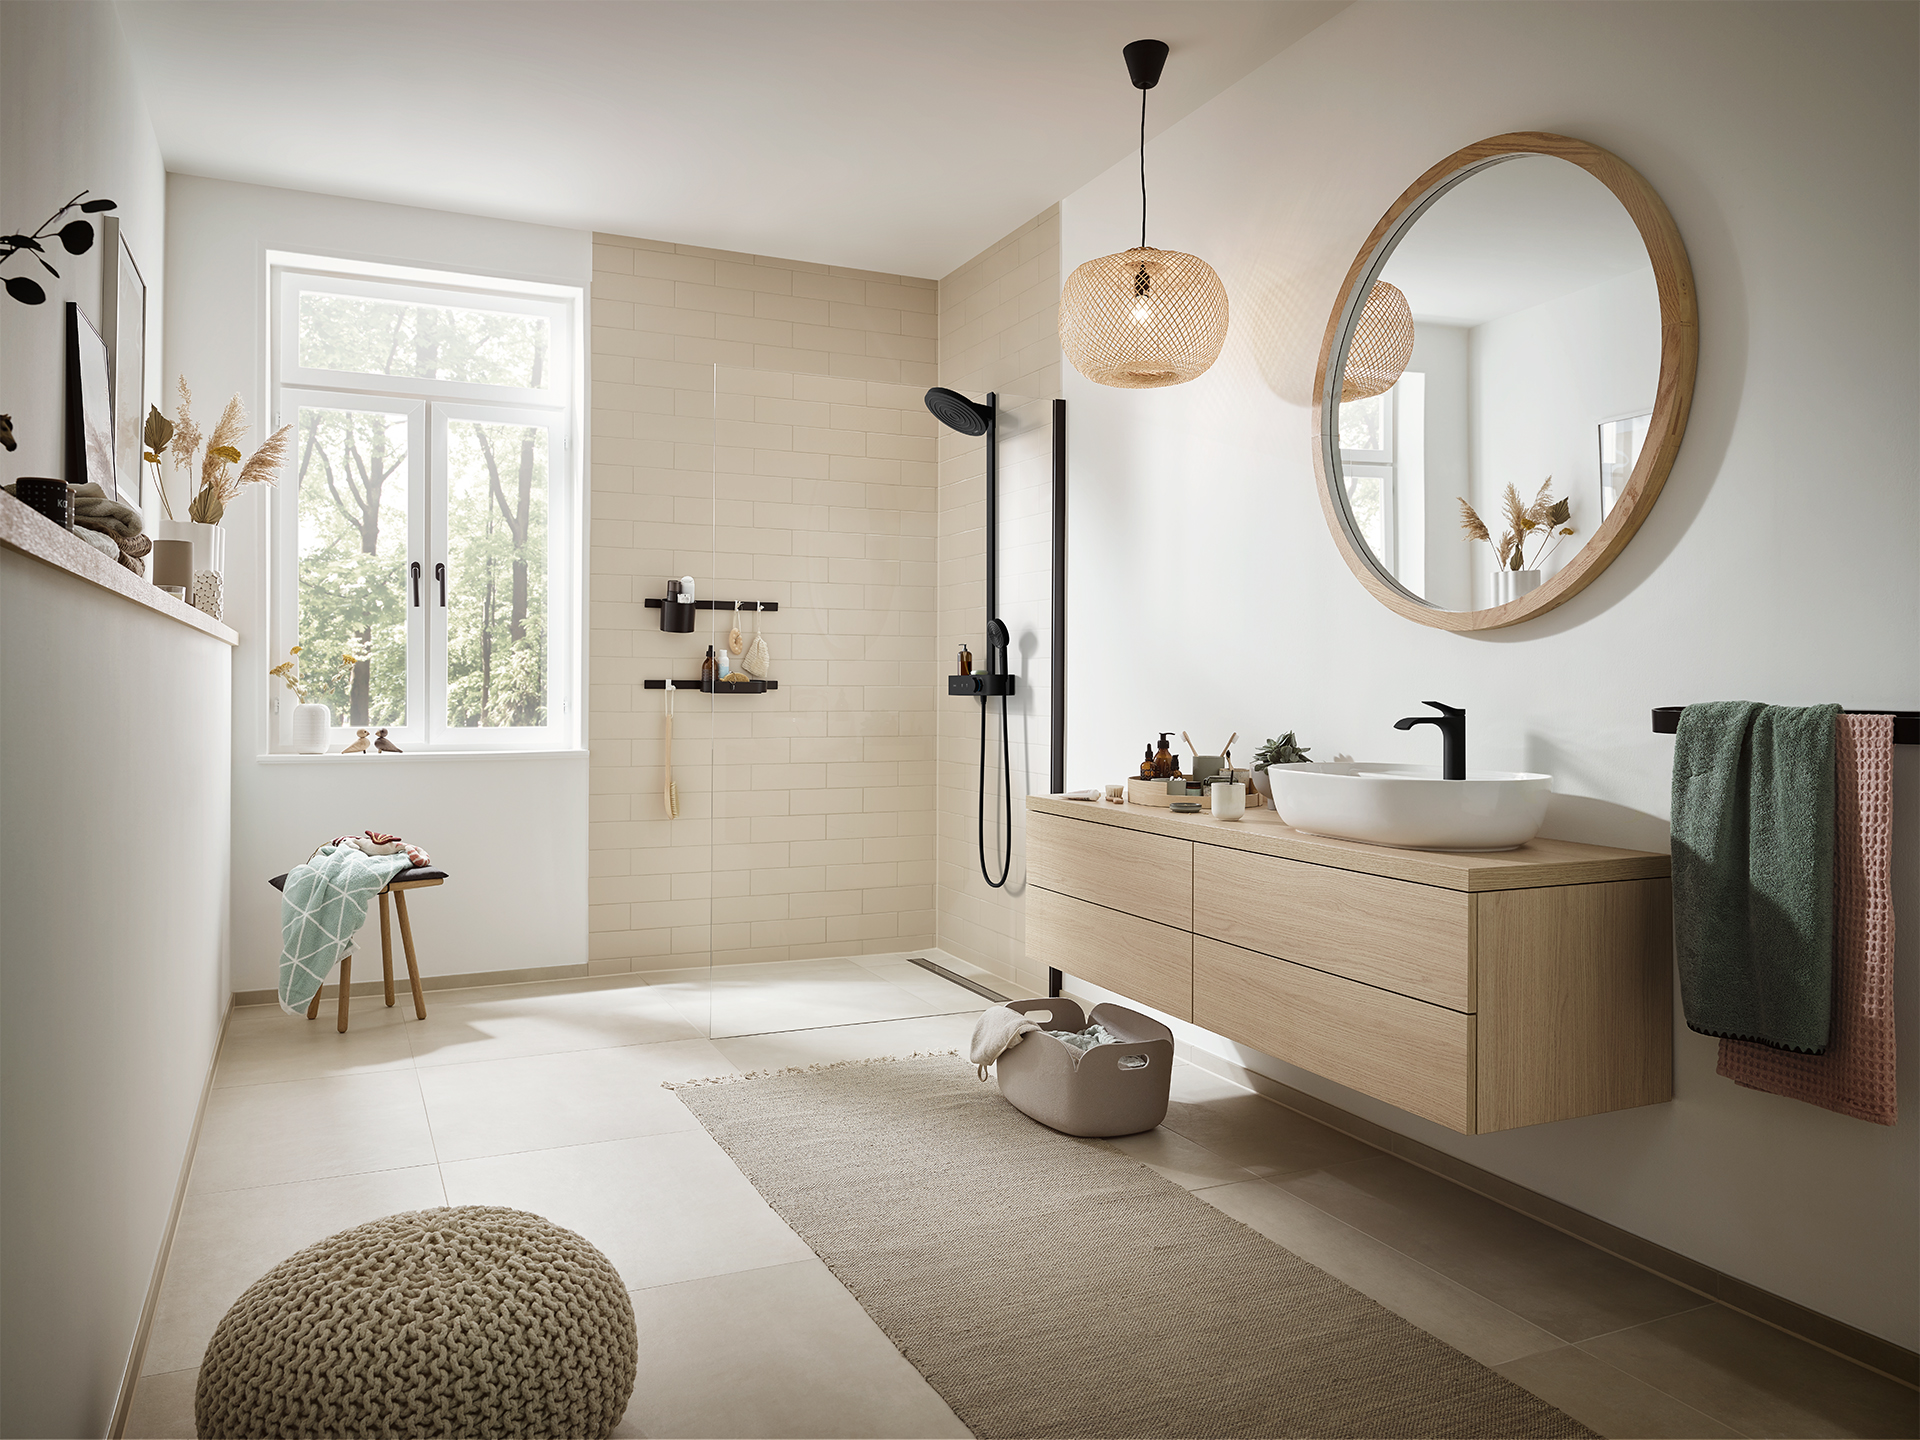 INTRODUCING Pulsify by hansgrohe